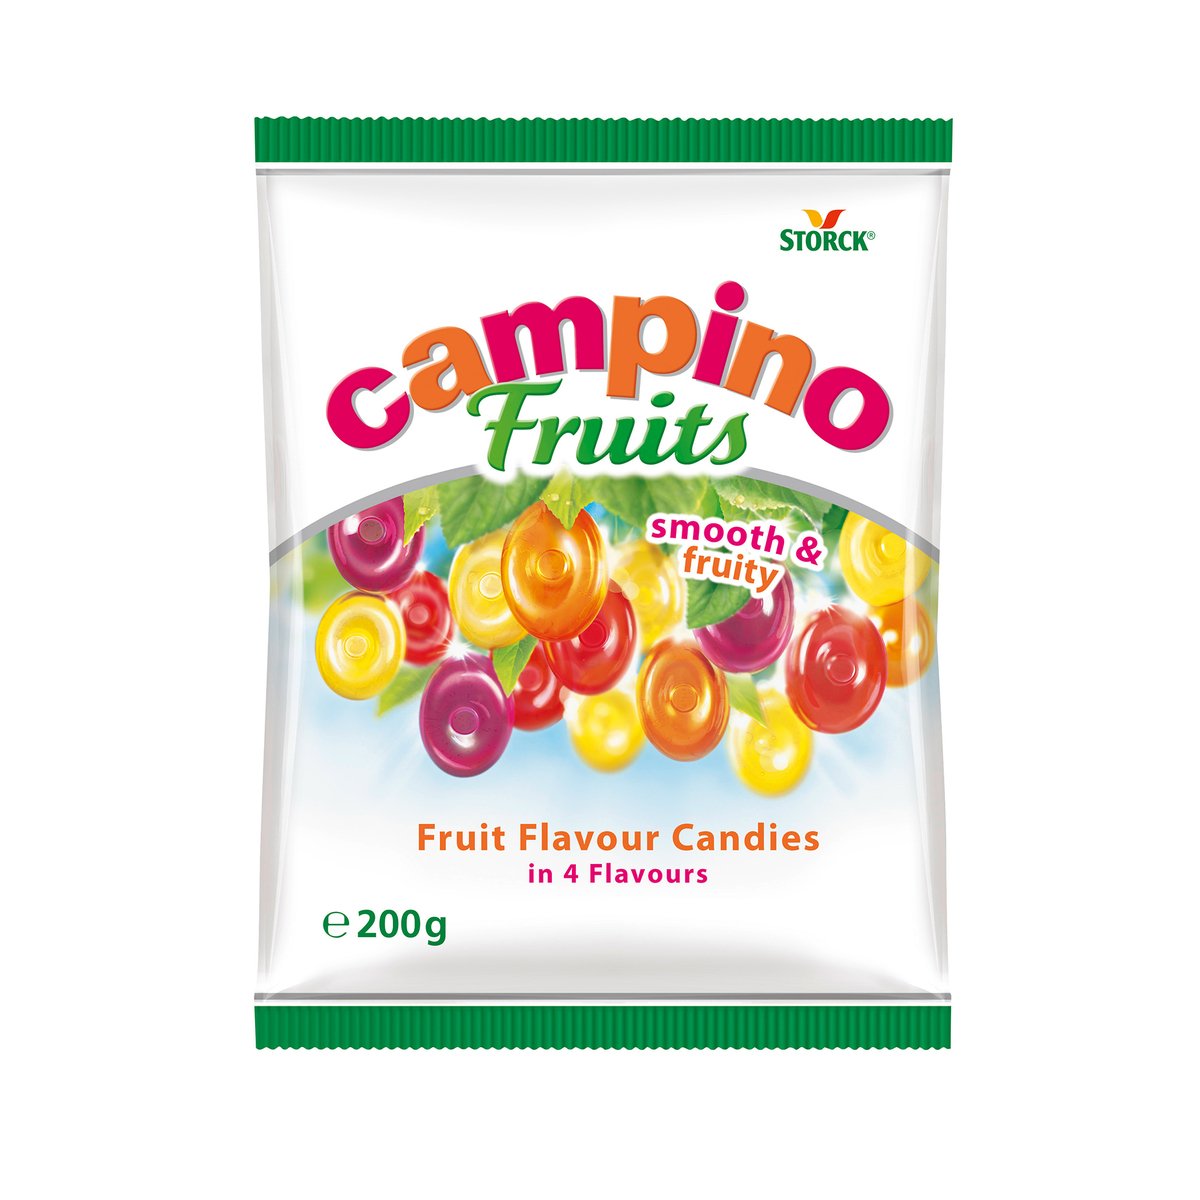 Storck Campino Fruits Flavour Candies, 200g 